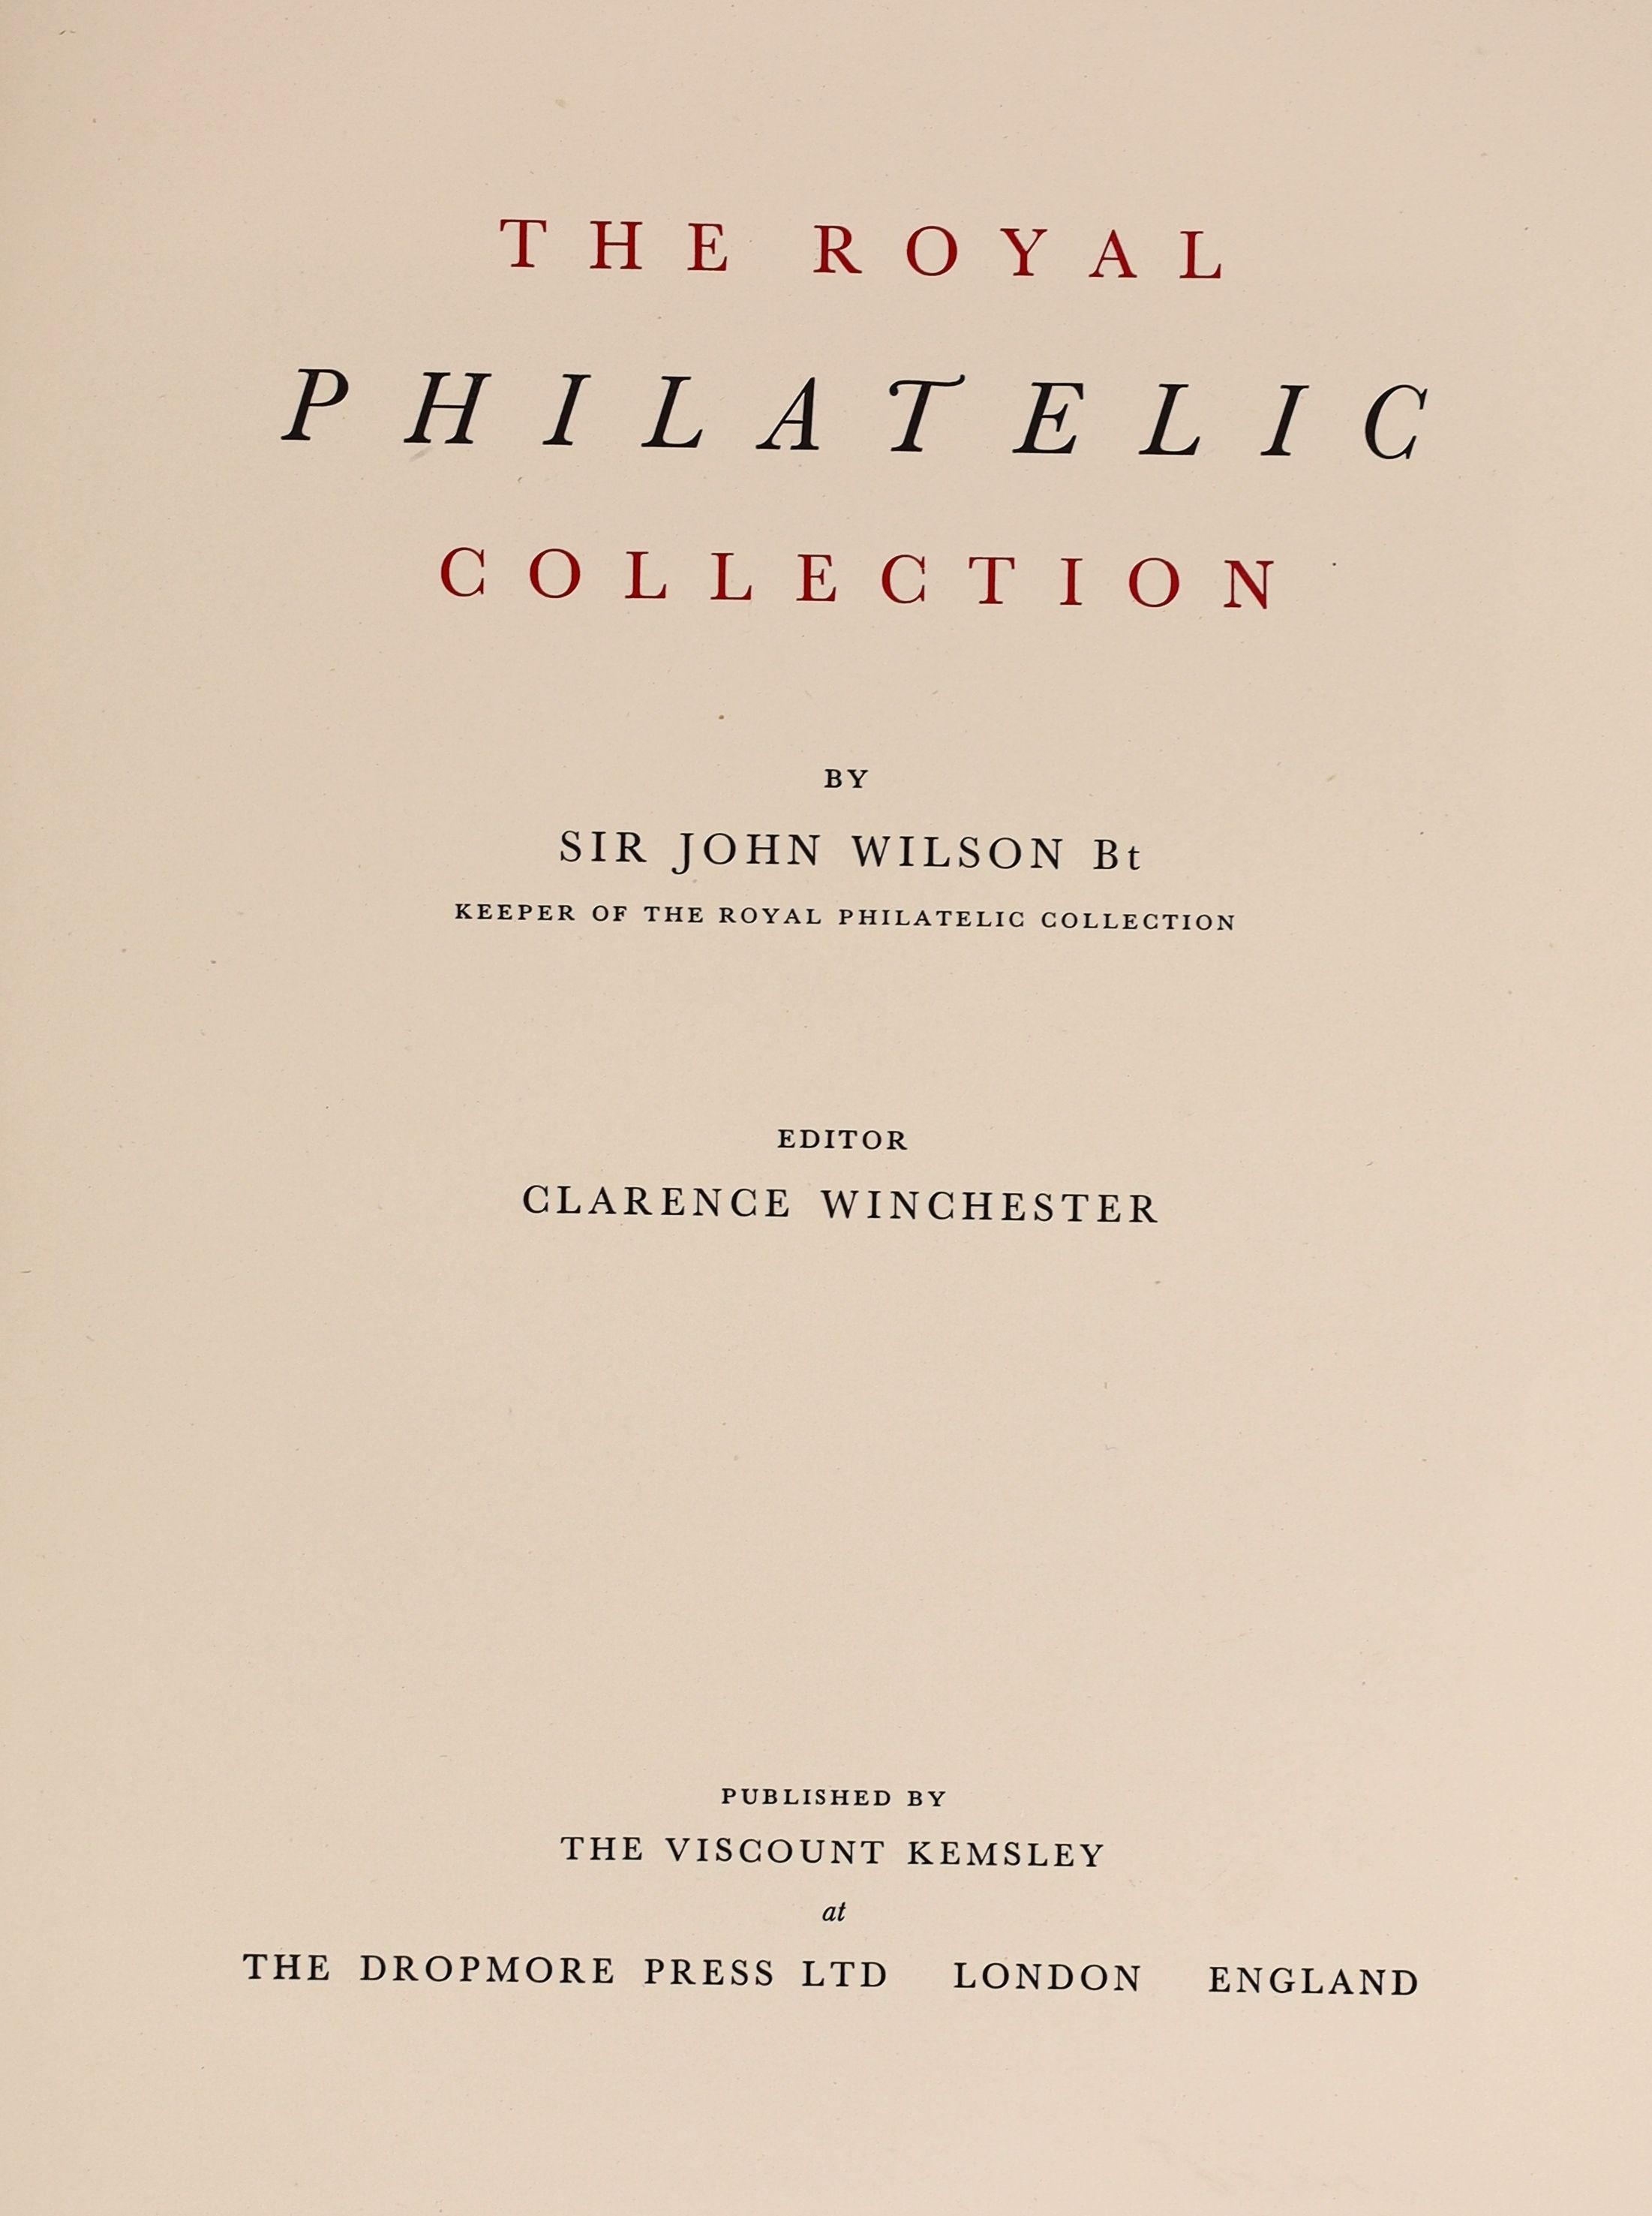 Wilson, Sir John - The Royal Philatelic Collection, with frontis portrait of King George VI, folio, crushed red morocco, with gilt Royal Coat of Arms, with 60 plates of which 12 are in colour, Viscount Kemsley at the Dro